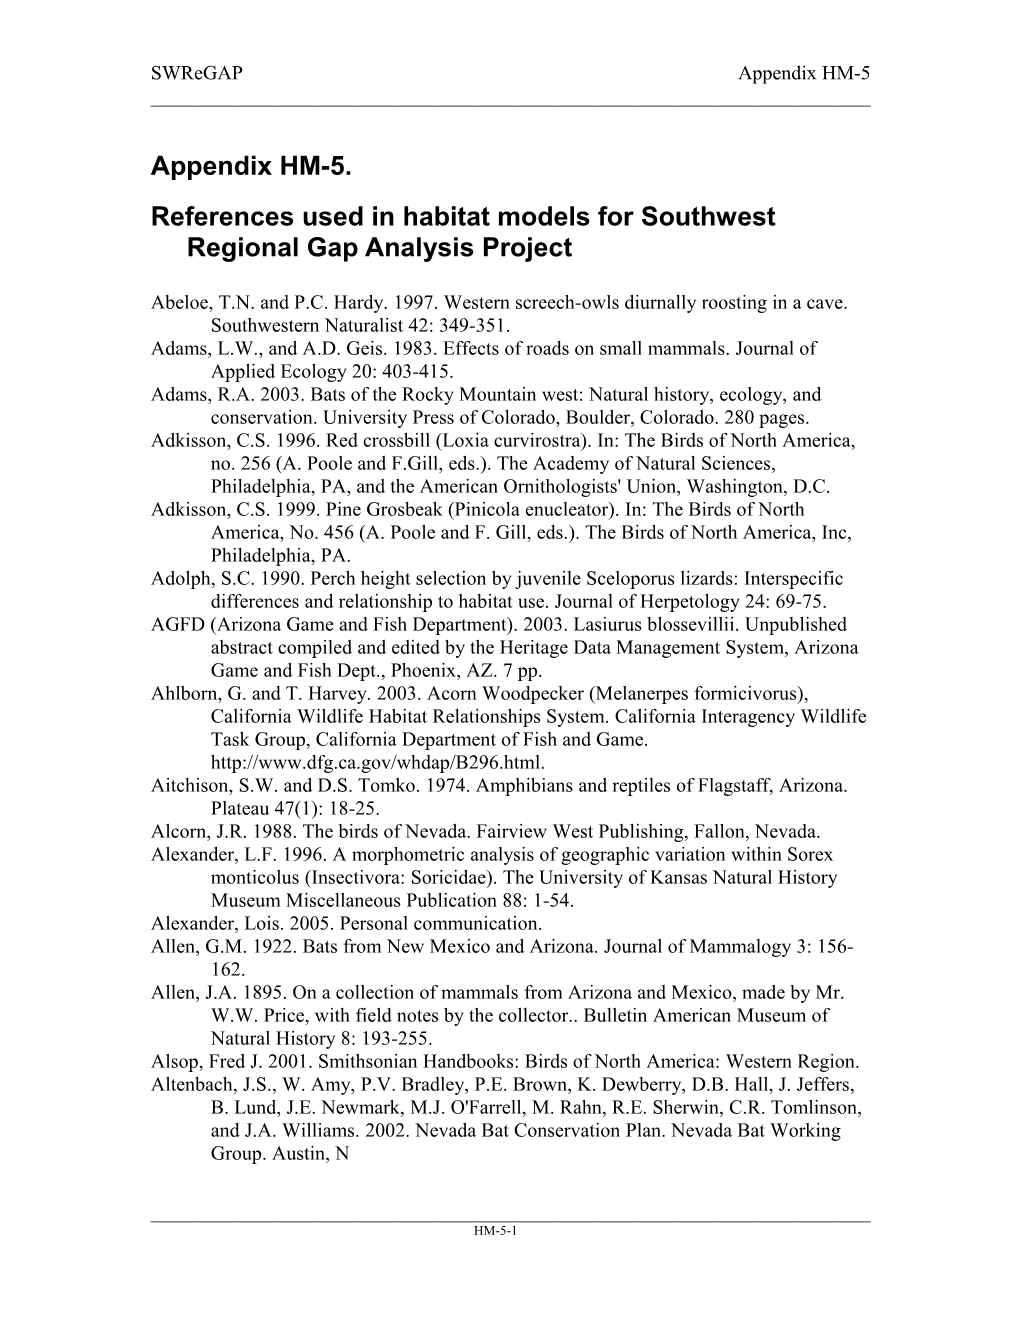 References Used in Habitat Models for Southwest Regional Gap Analysis Project